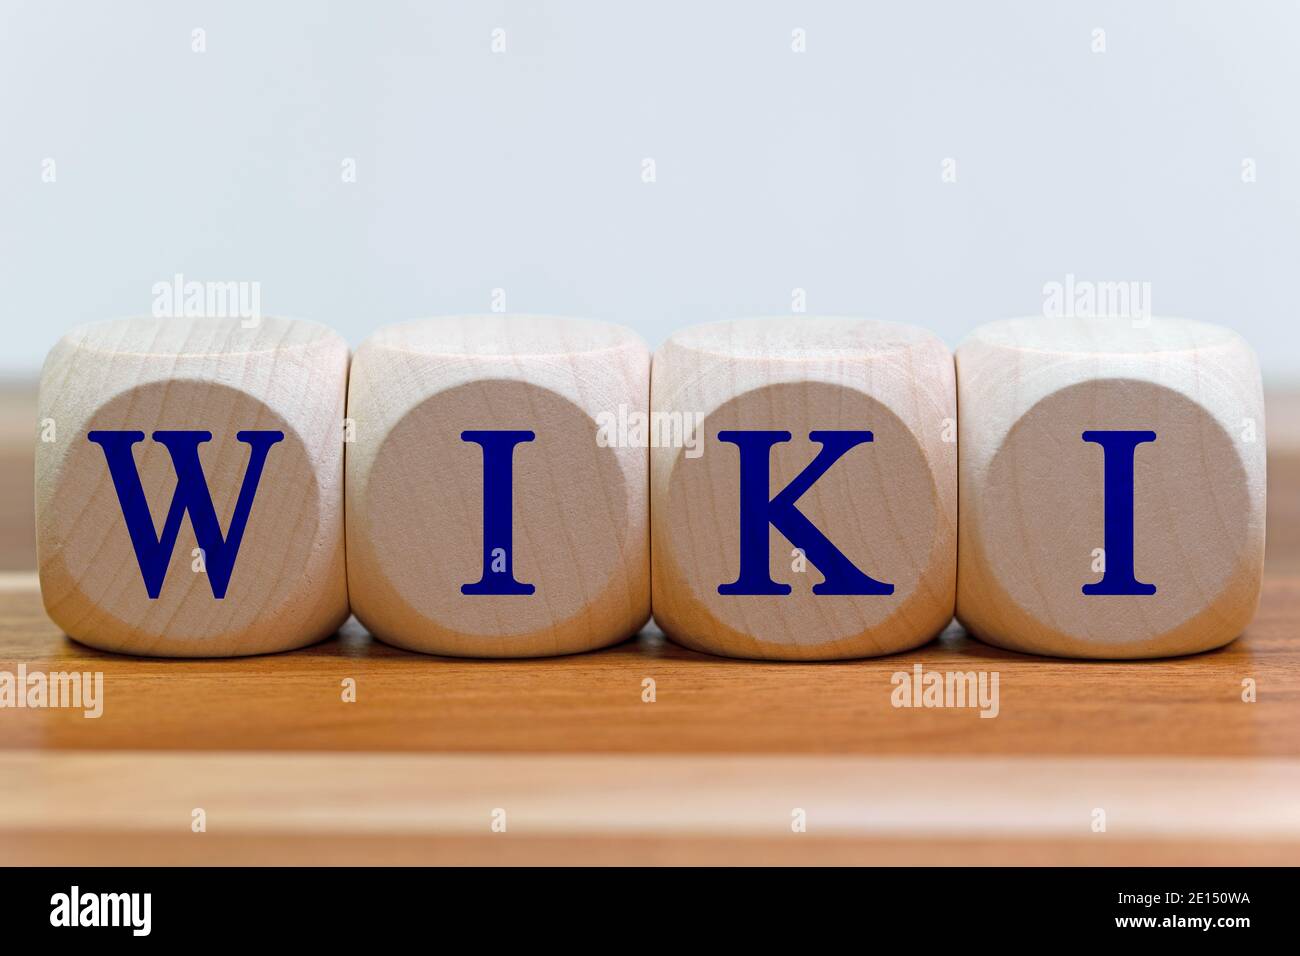 Wooden cubes labeled Wiki, close up Stock Photo